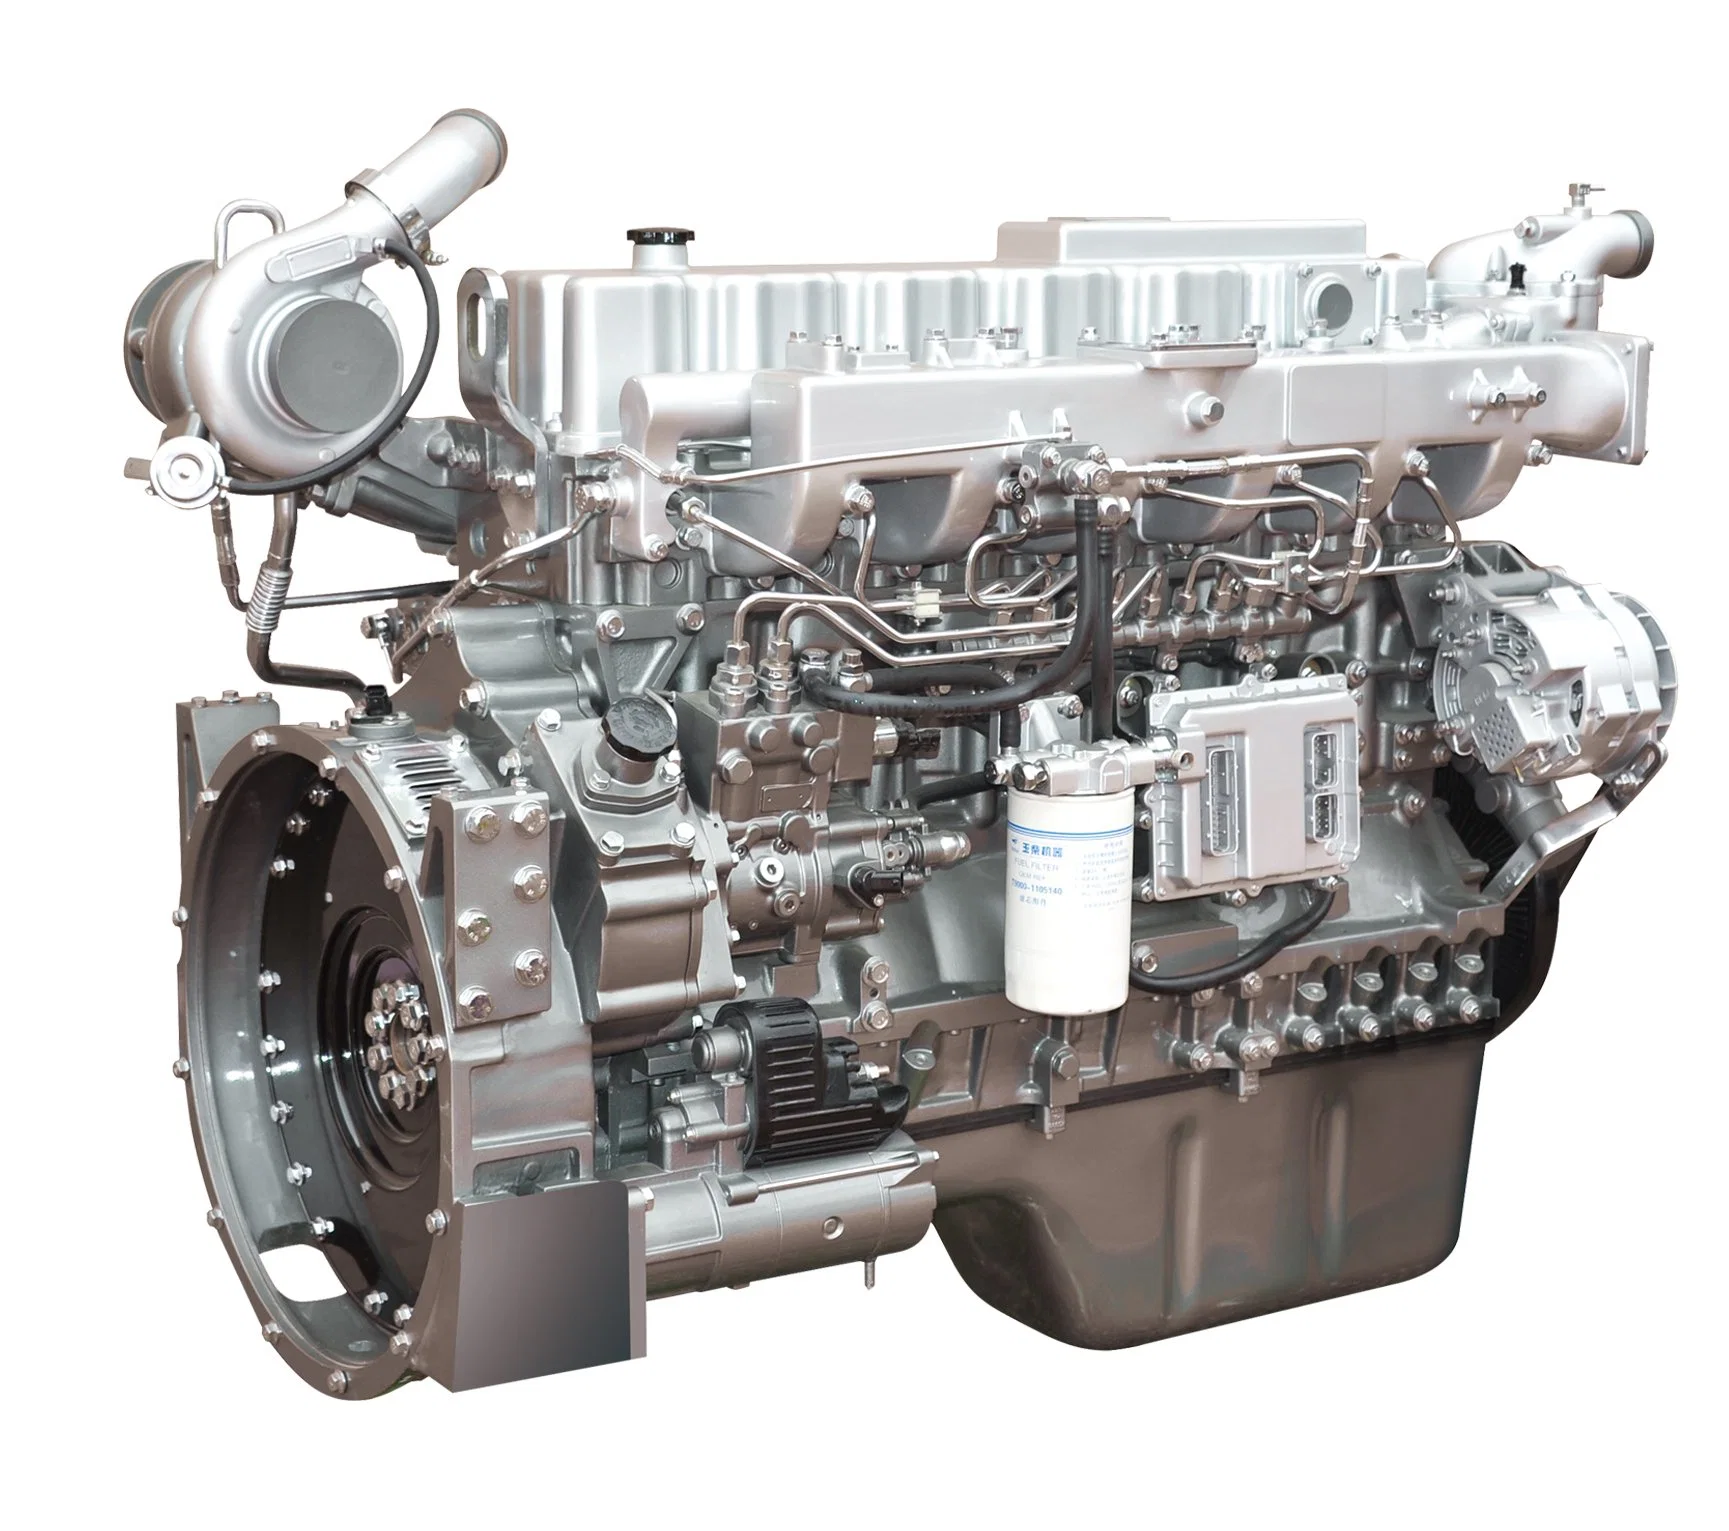 Yuchai YC6MK (YC6MK420-50) Euro 5 Emission Medium and Heavy Duty Diesel Engine with High Power, High Reliability, Low Fuel Consumption and Sufficient Power